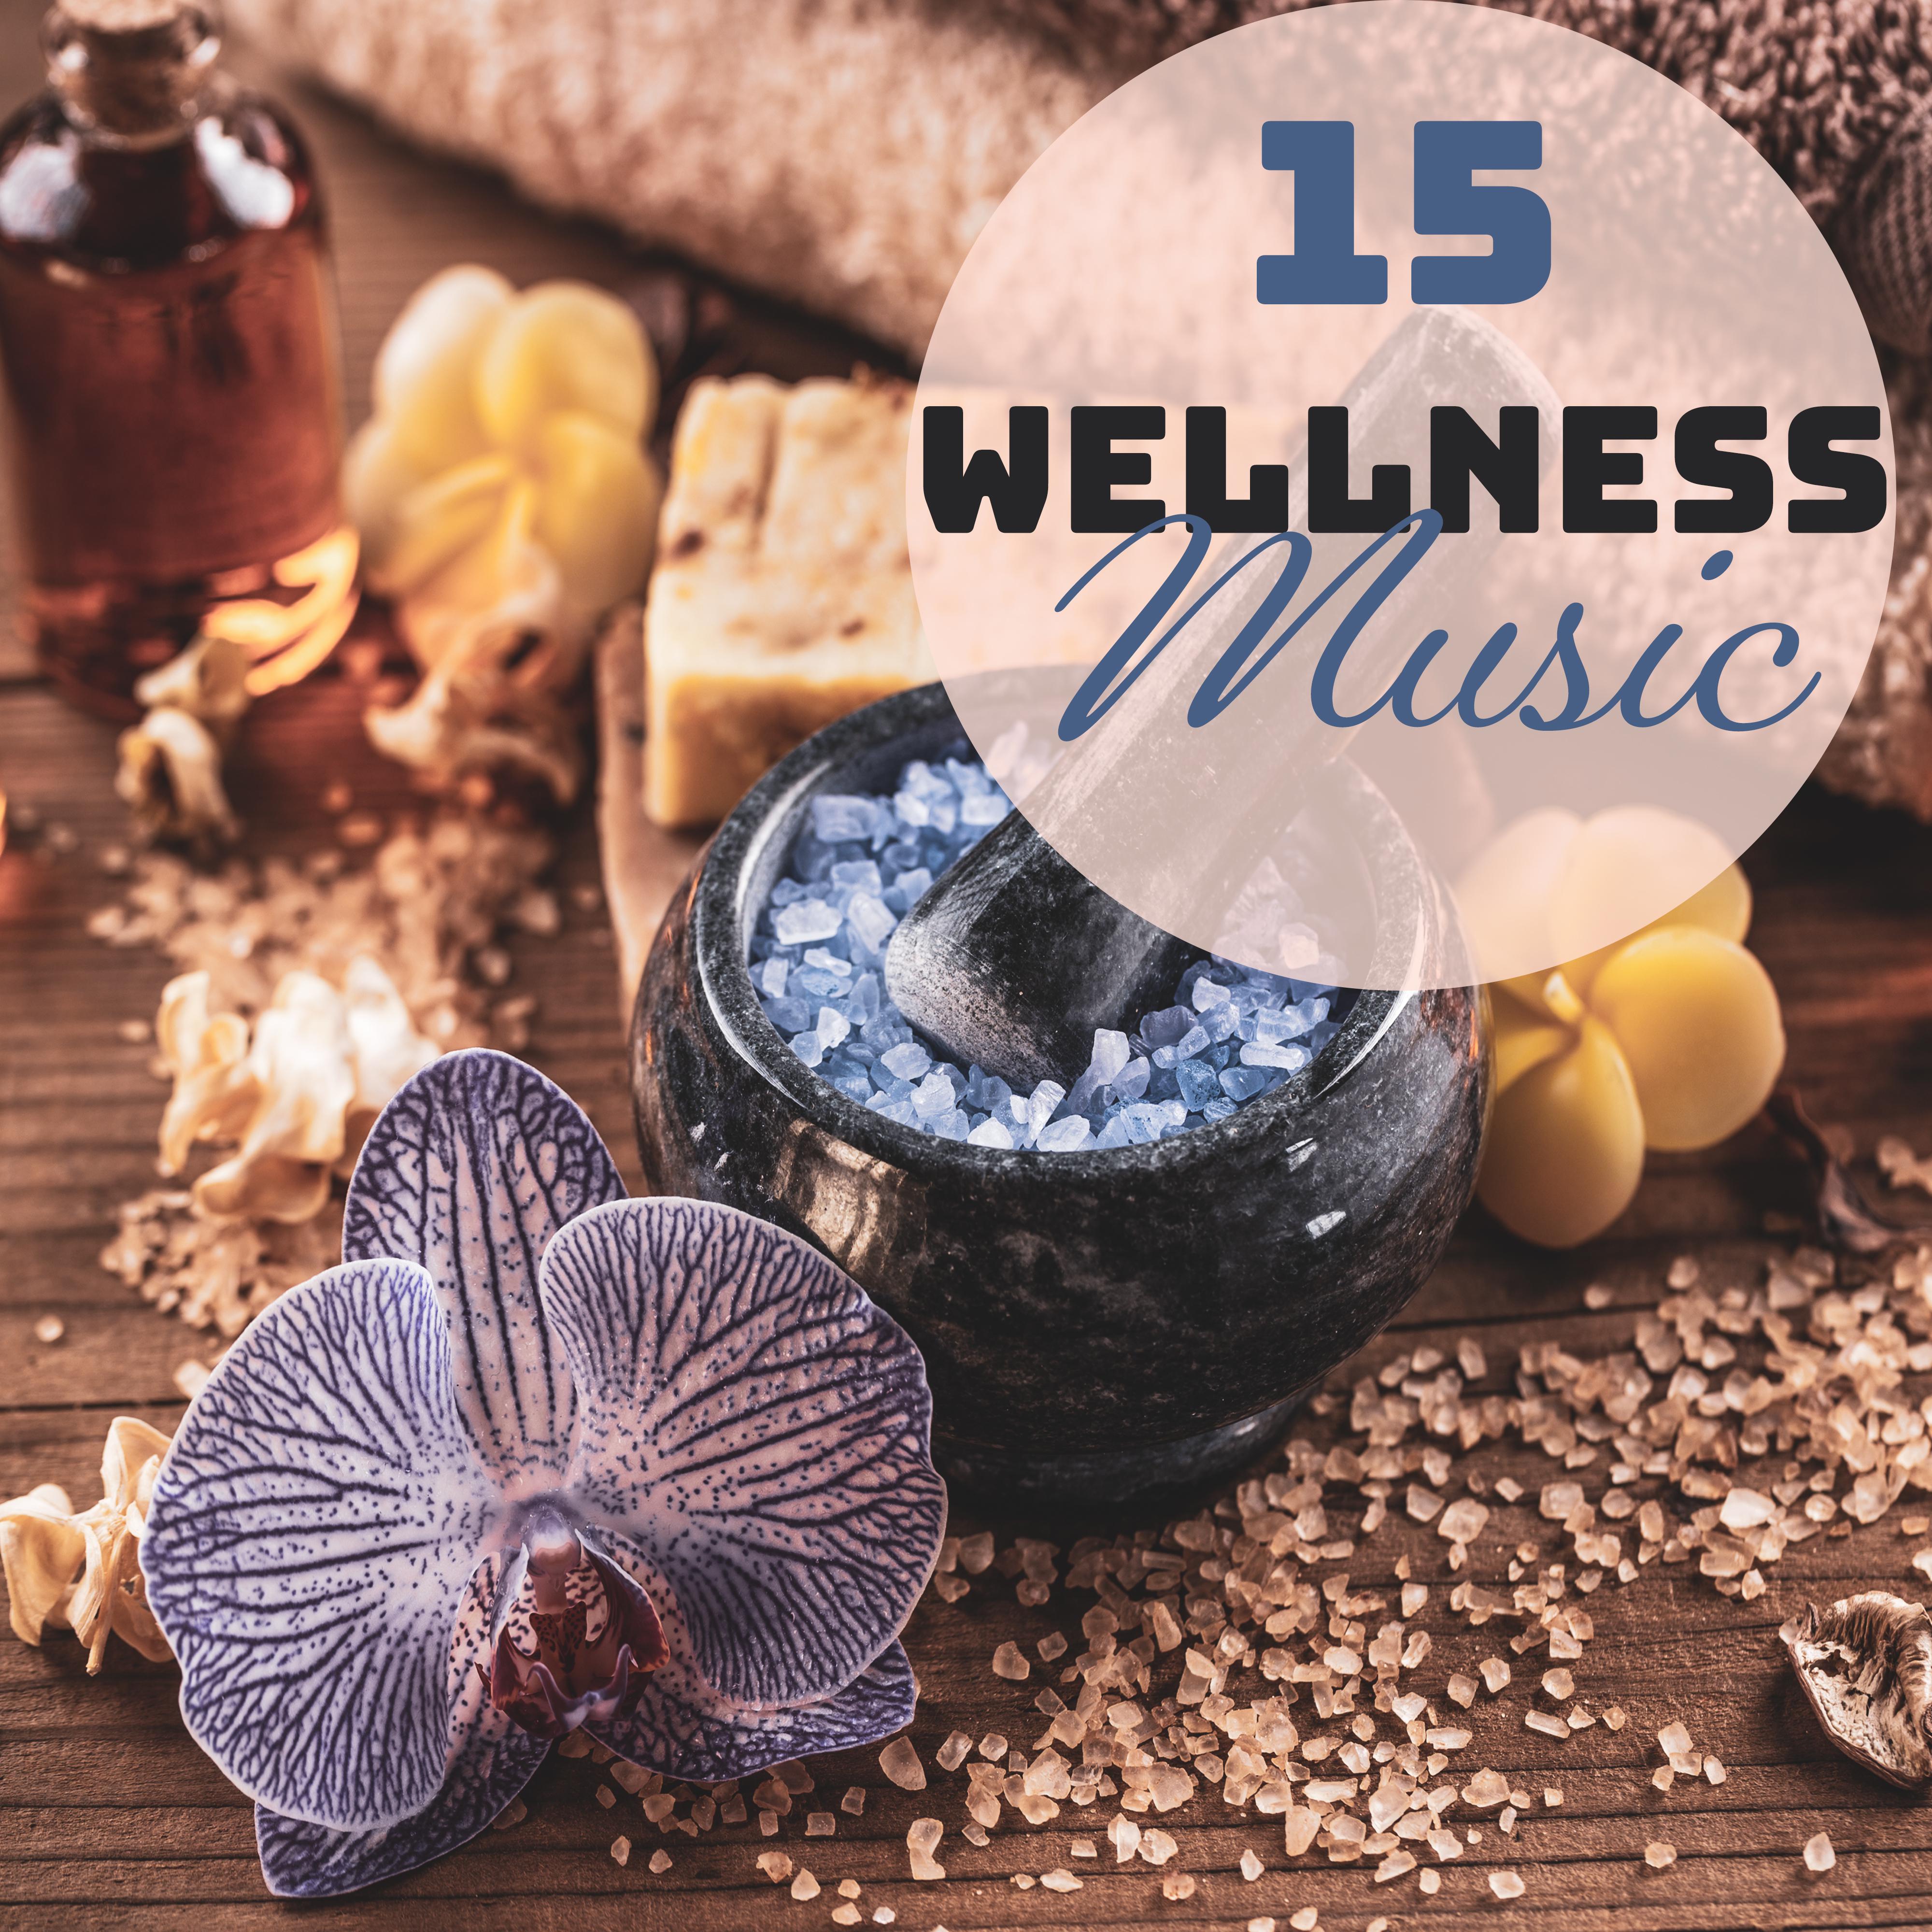 15 Wellness Music  Relaxing Music for Spa, Sleep, Massage, Stress Relief, Lounge, Zen, Spa Relaxation